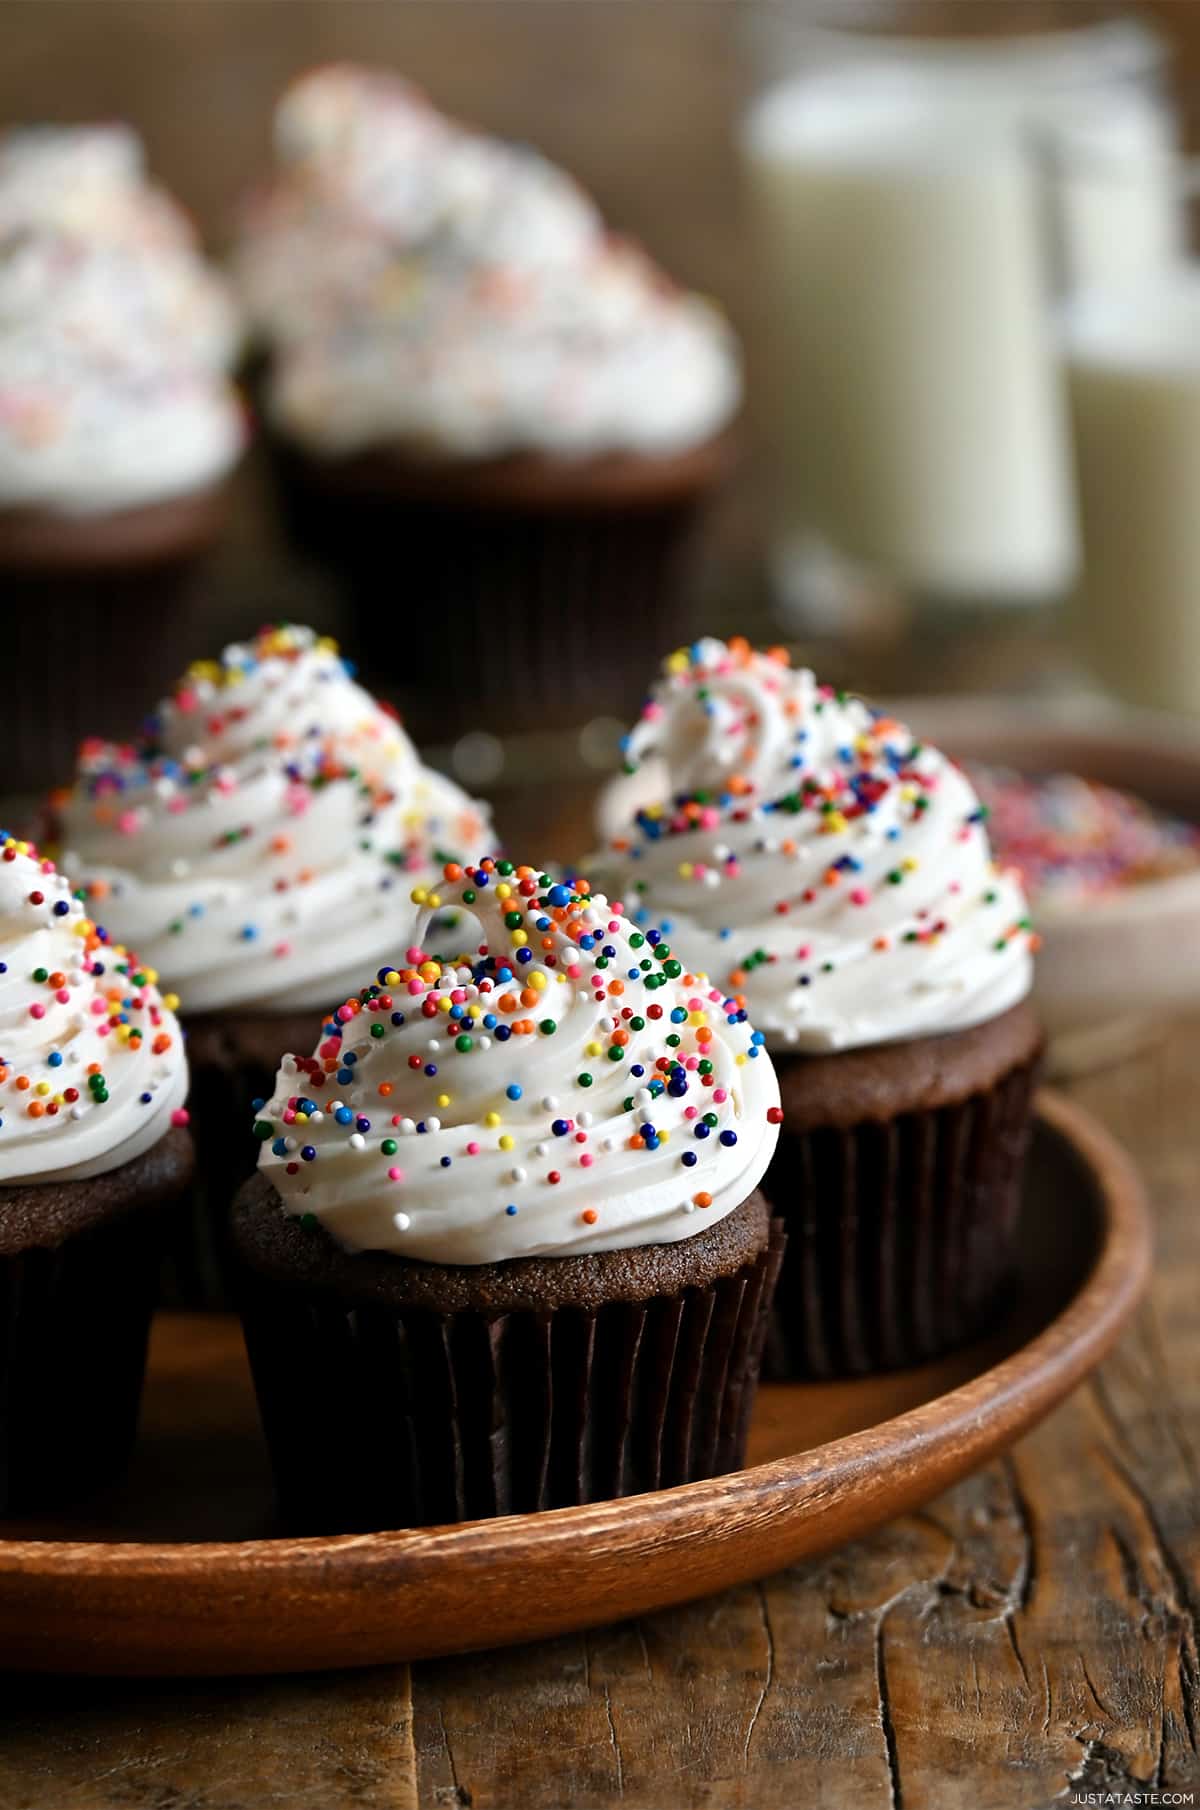 Chocolate cupcakes topped with vanilla frosting and rainbow sprinkles on a wood serving plate.